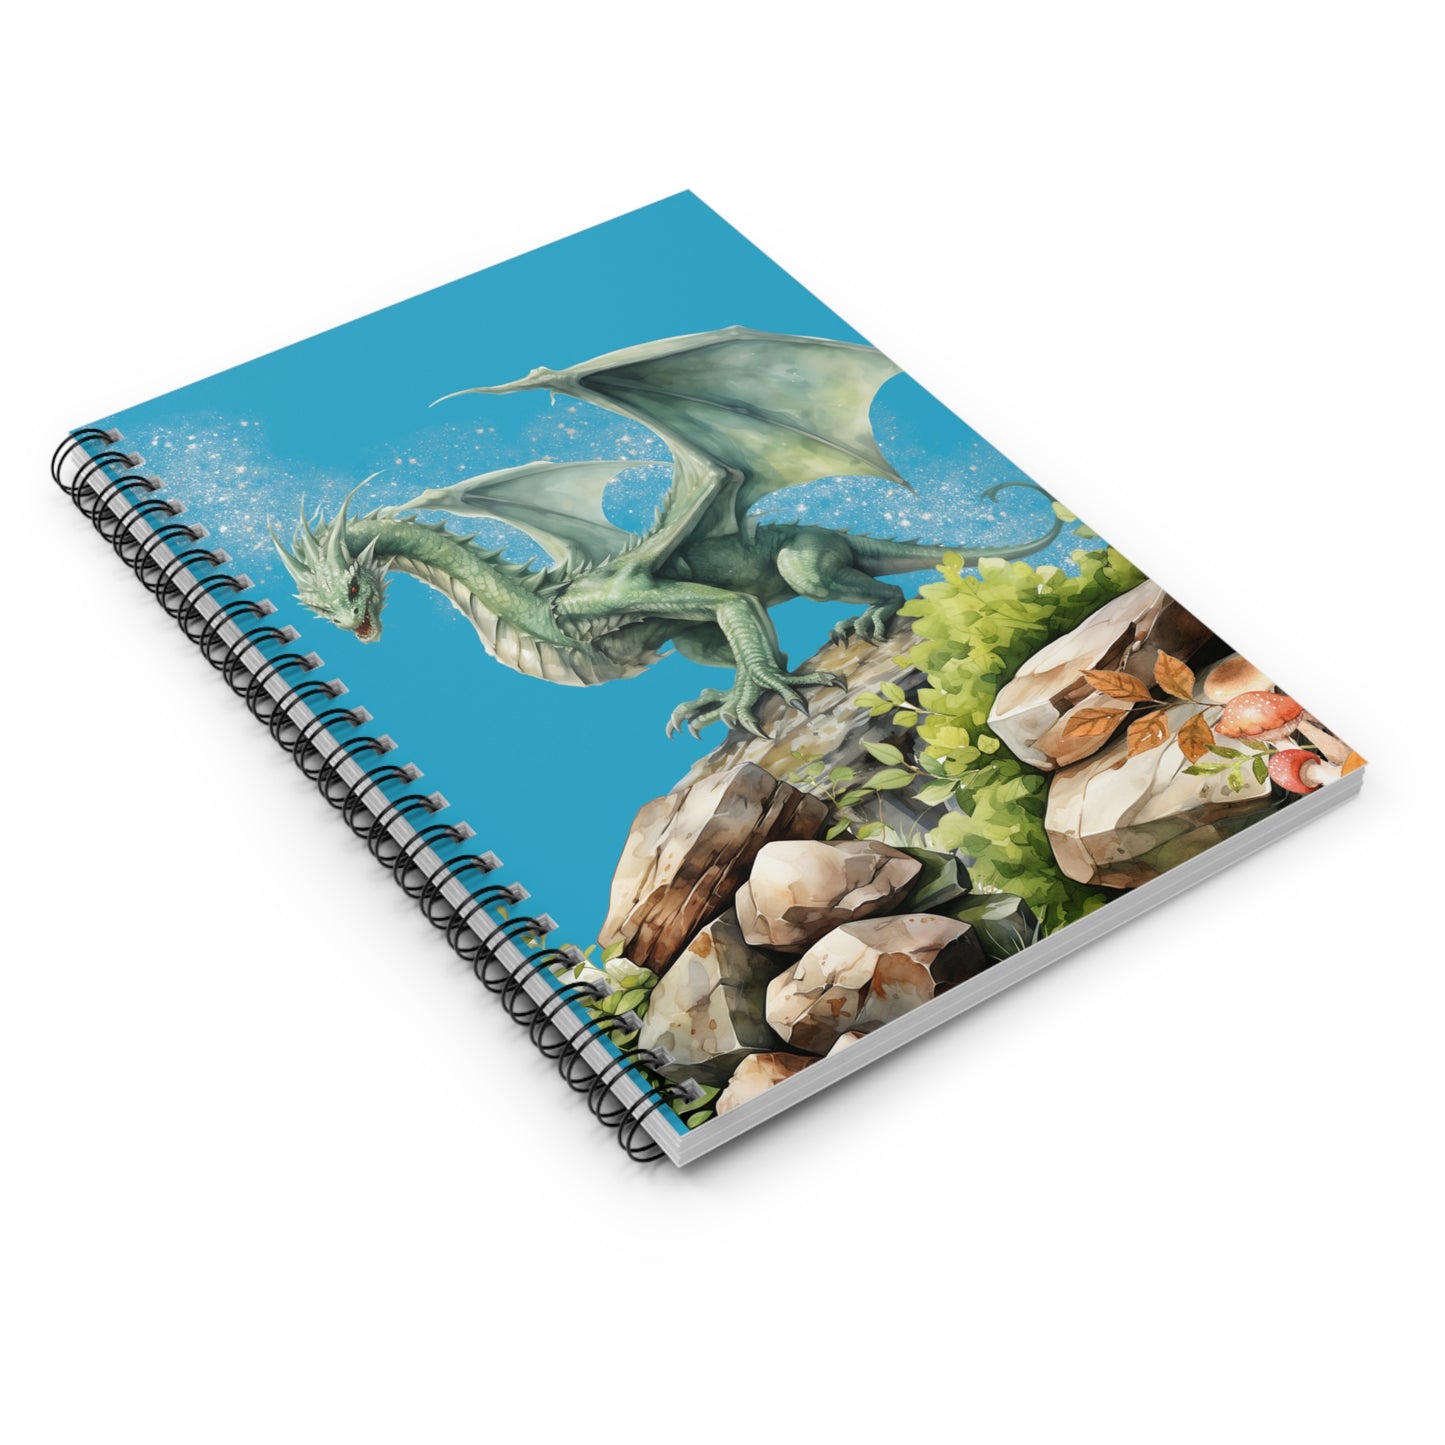 Clear Blue Skies Ahead: Spiral Notebook - Log Books - Journals - Diaries - and More Custom Printed by TheGlassyLass